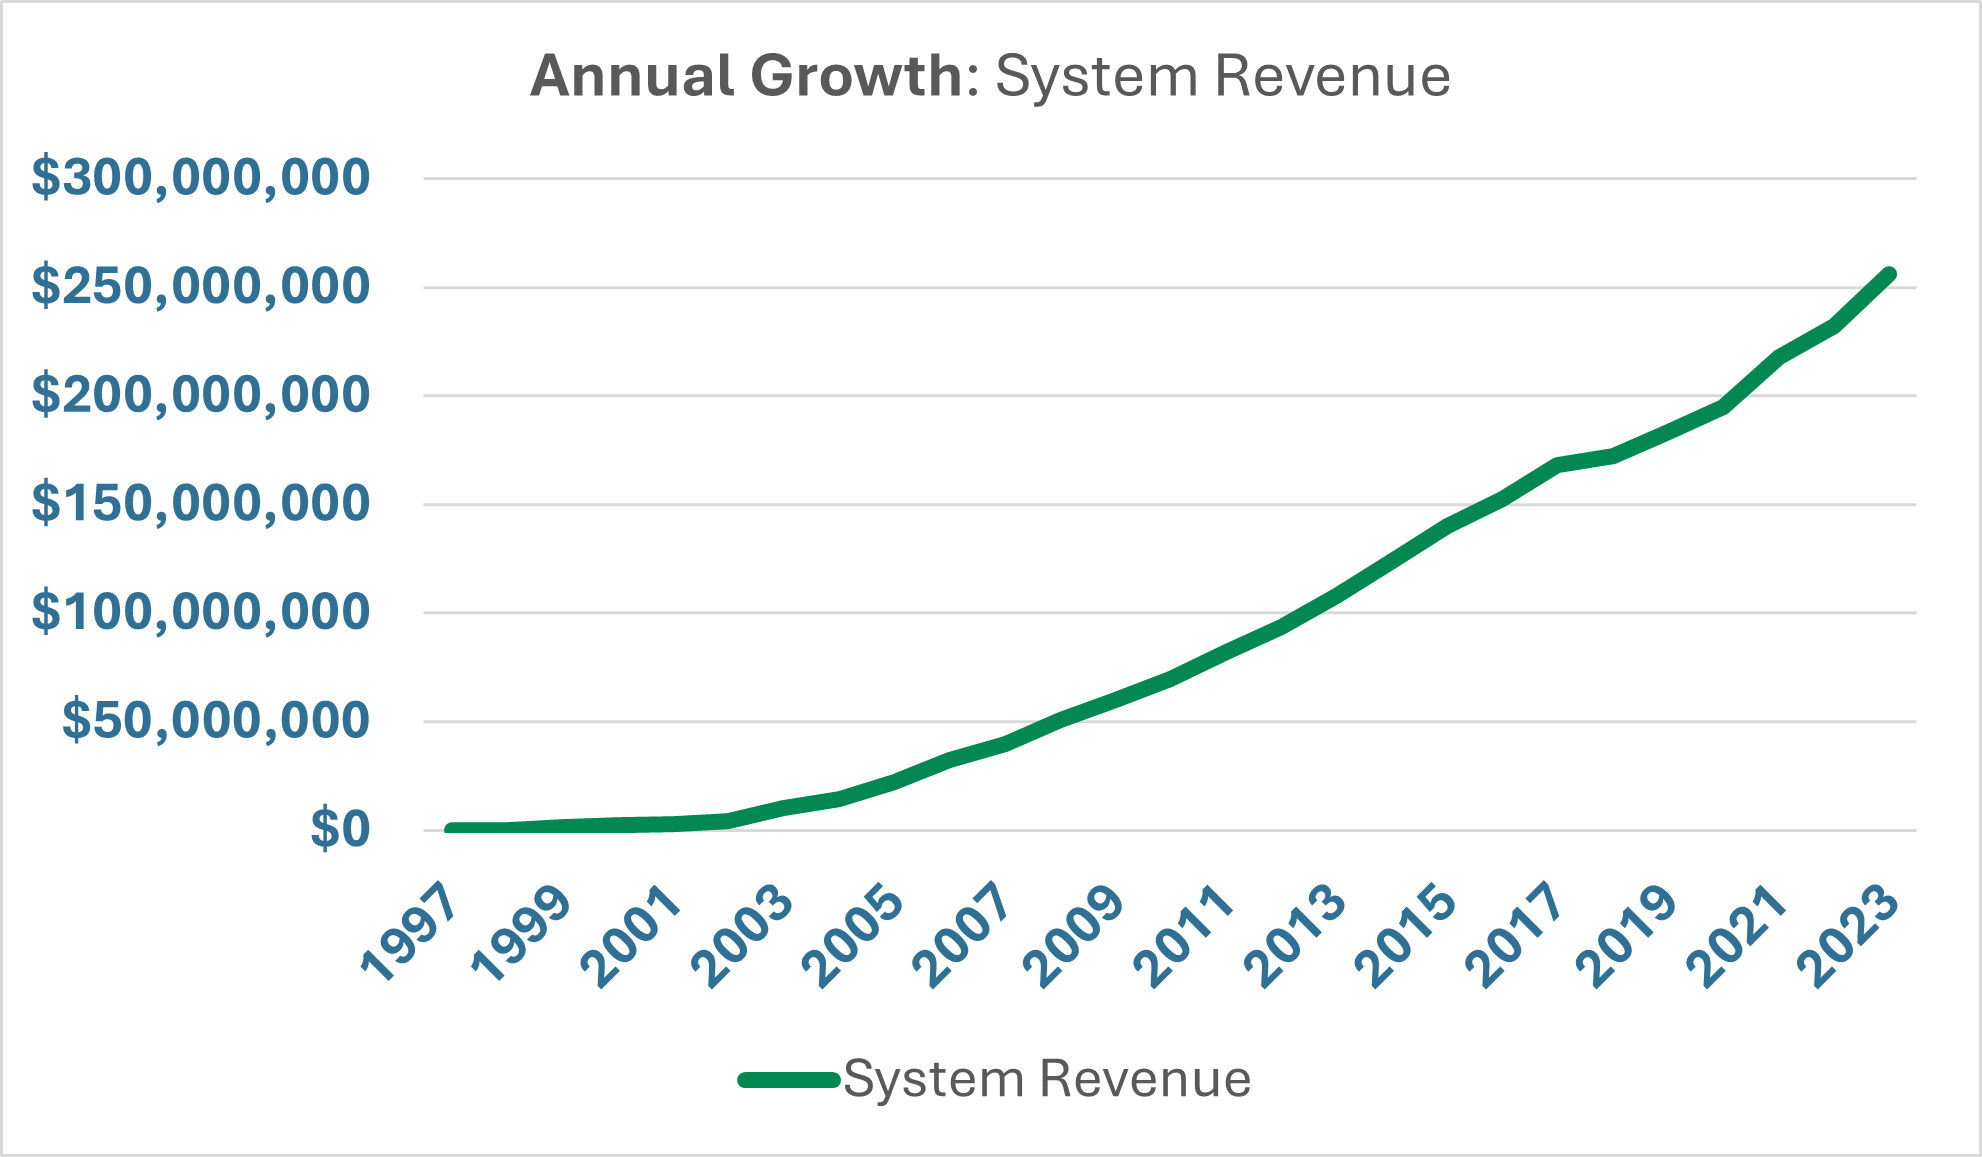 Graph from 1997 to 2023 Displaying Financial Growth of $0 to over $250 Million